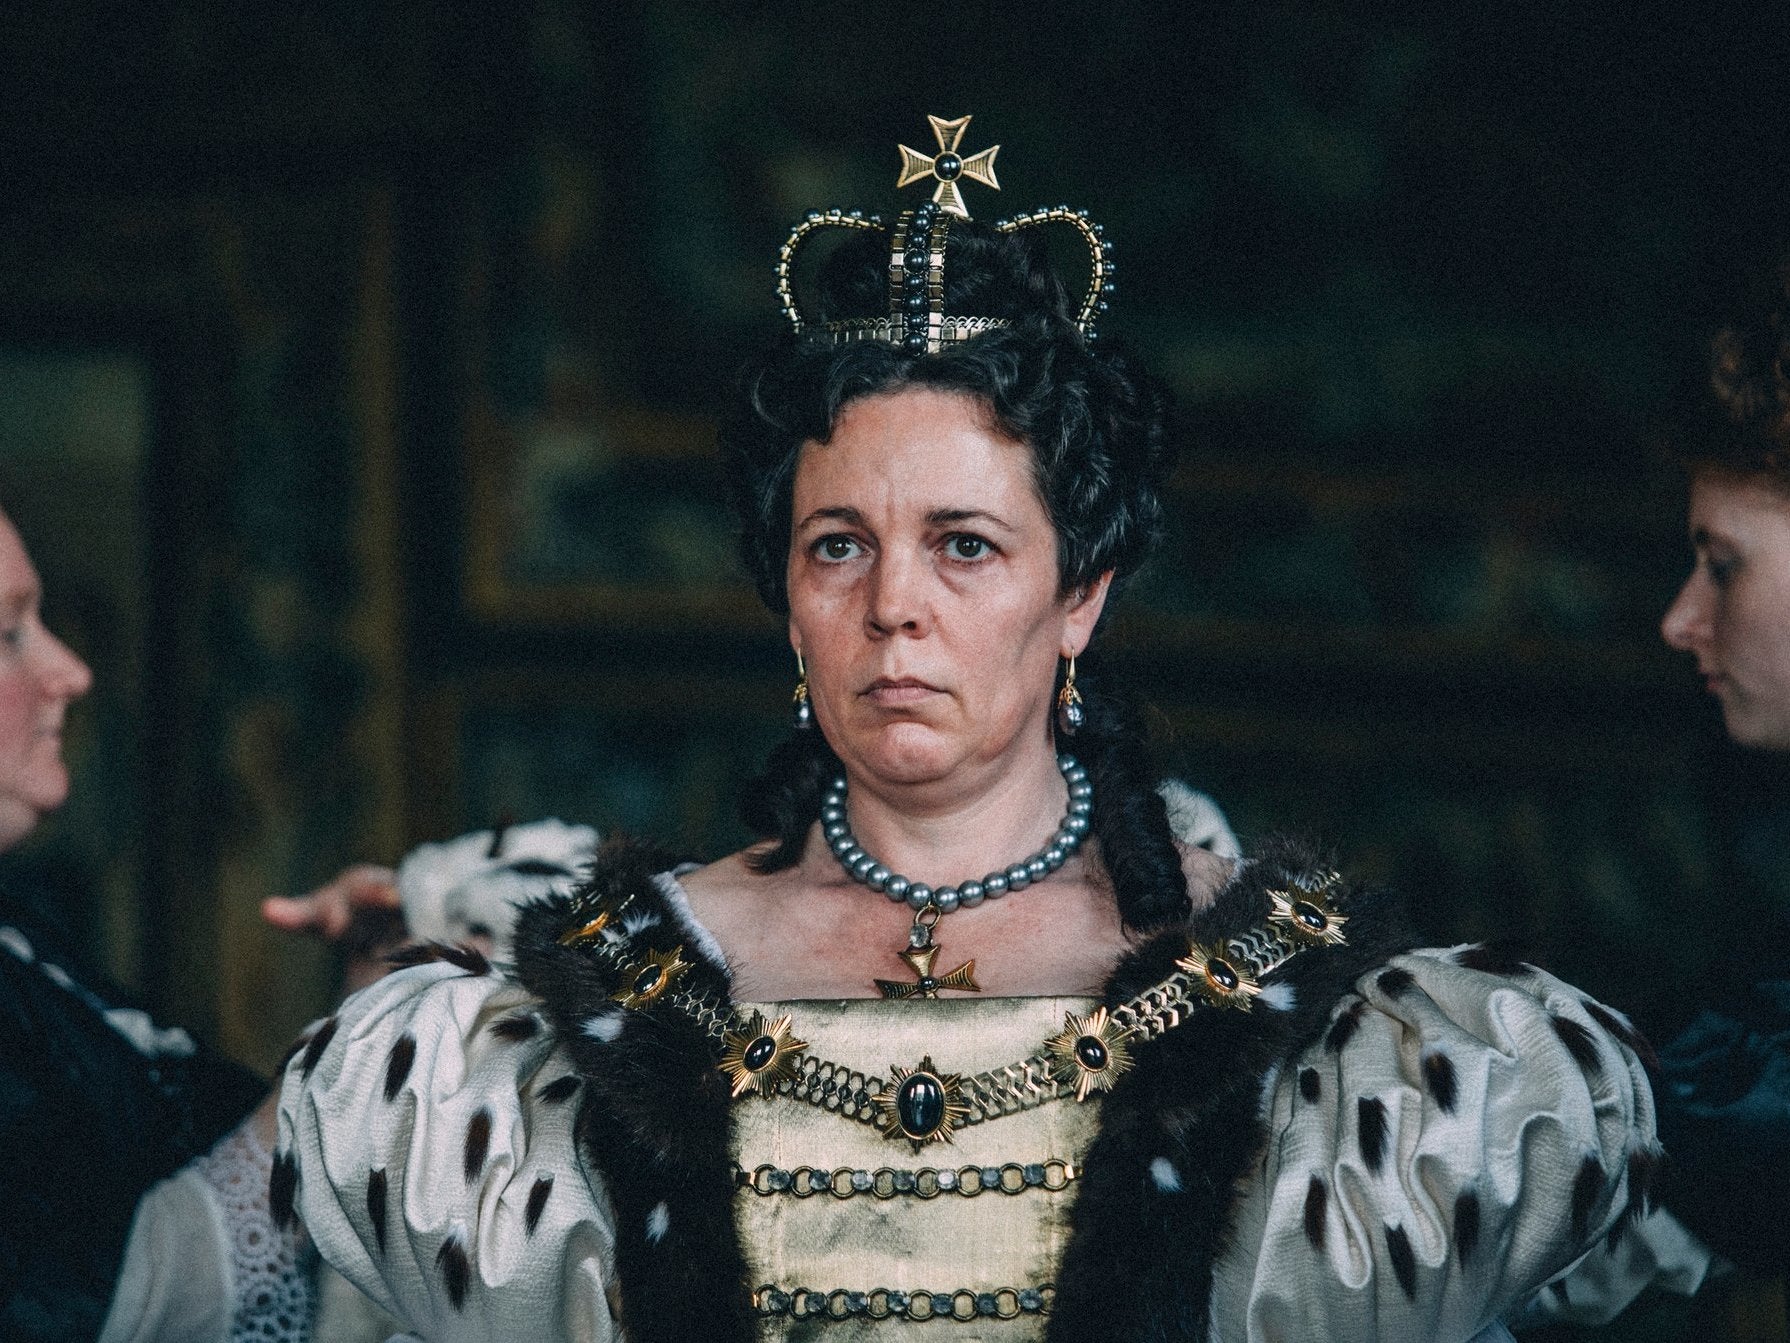 Olivia Colman’s performance as Queen Anne might be her best yet